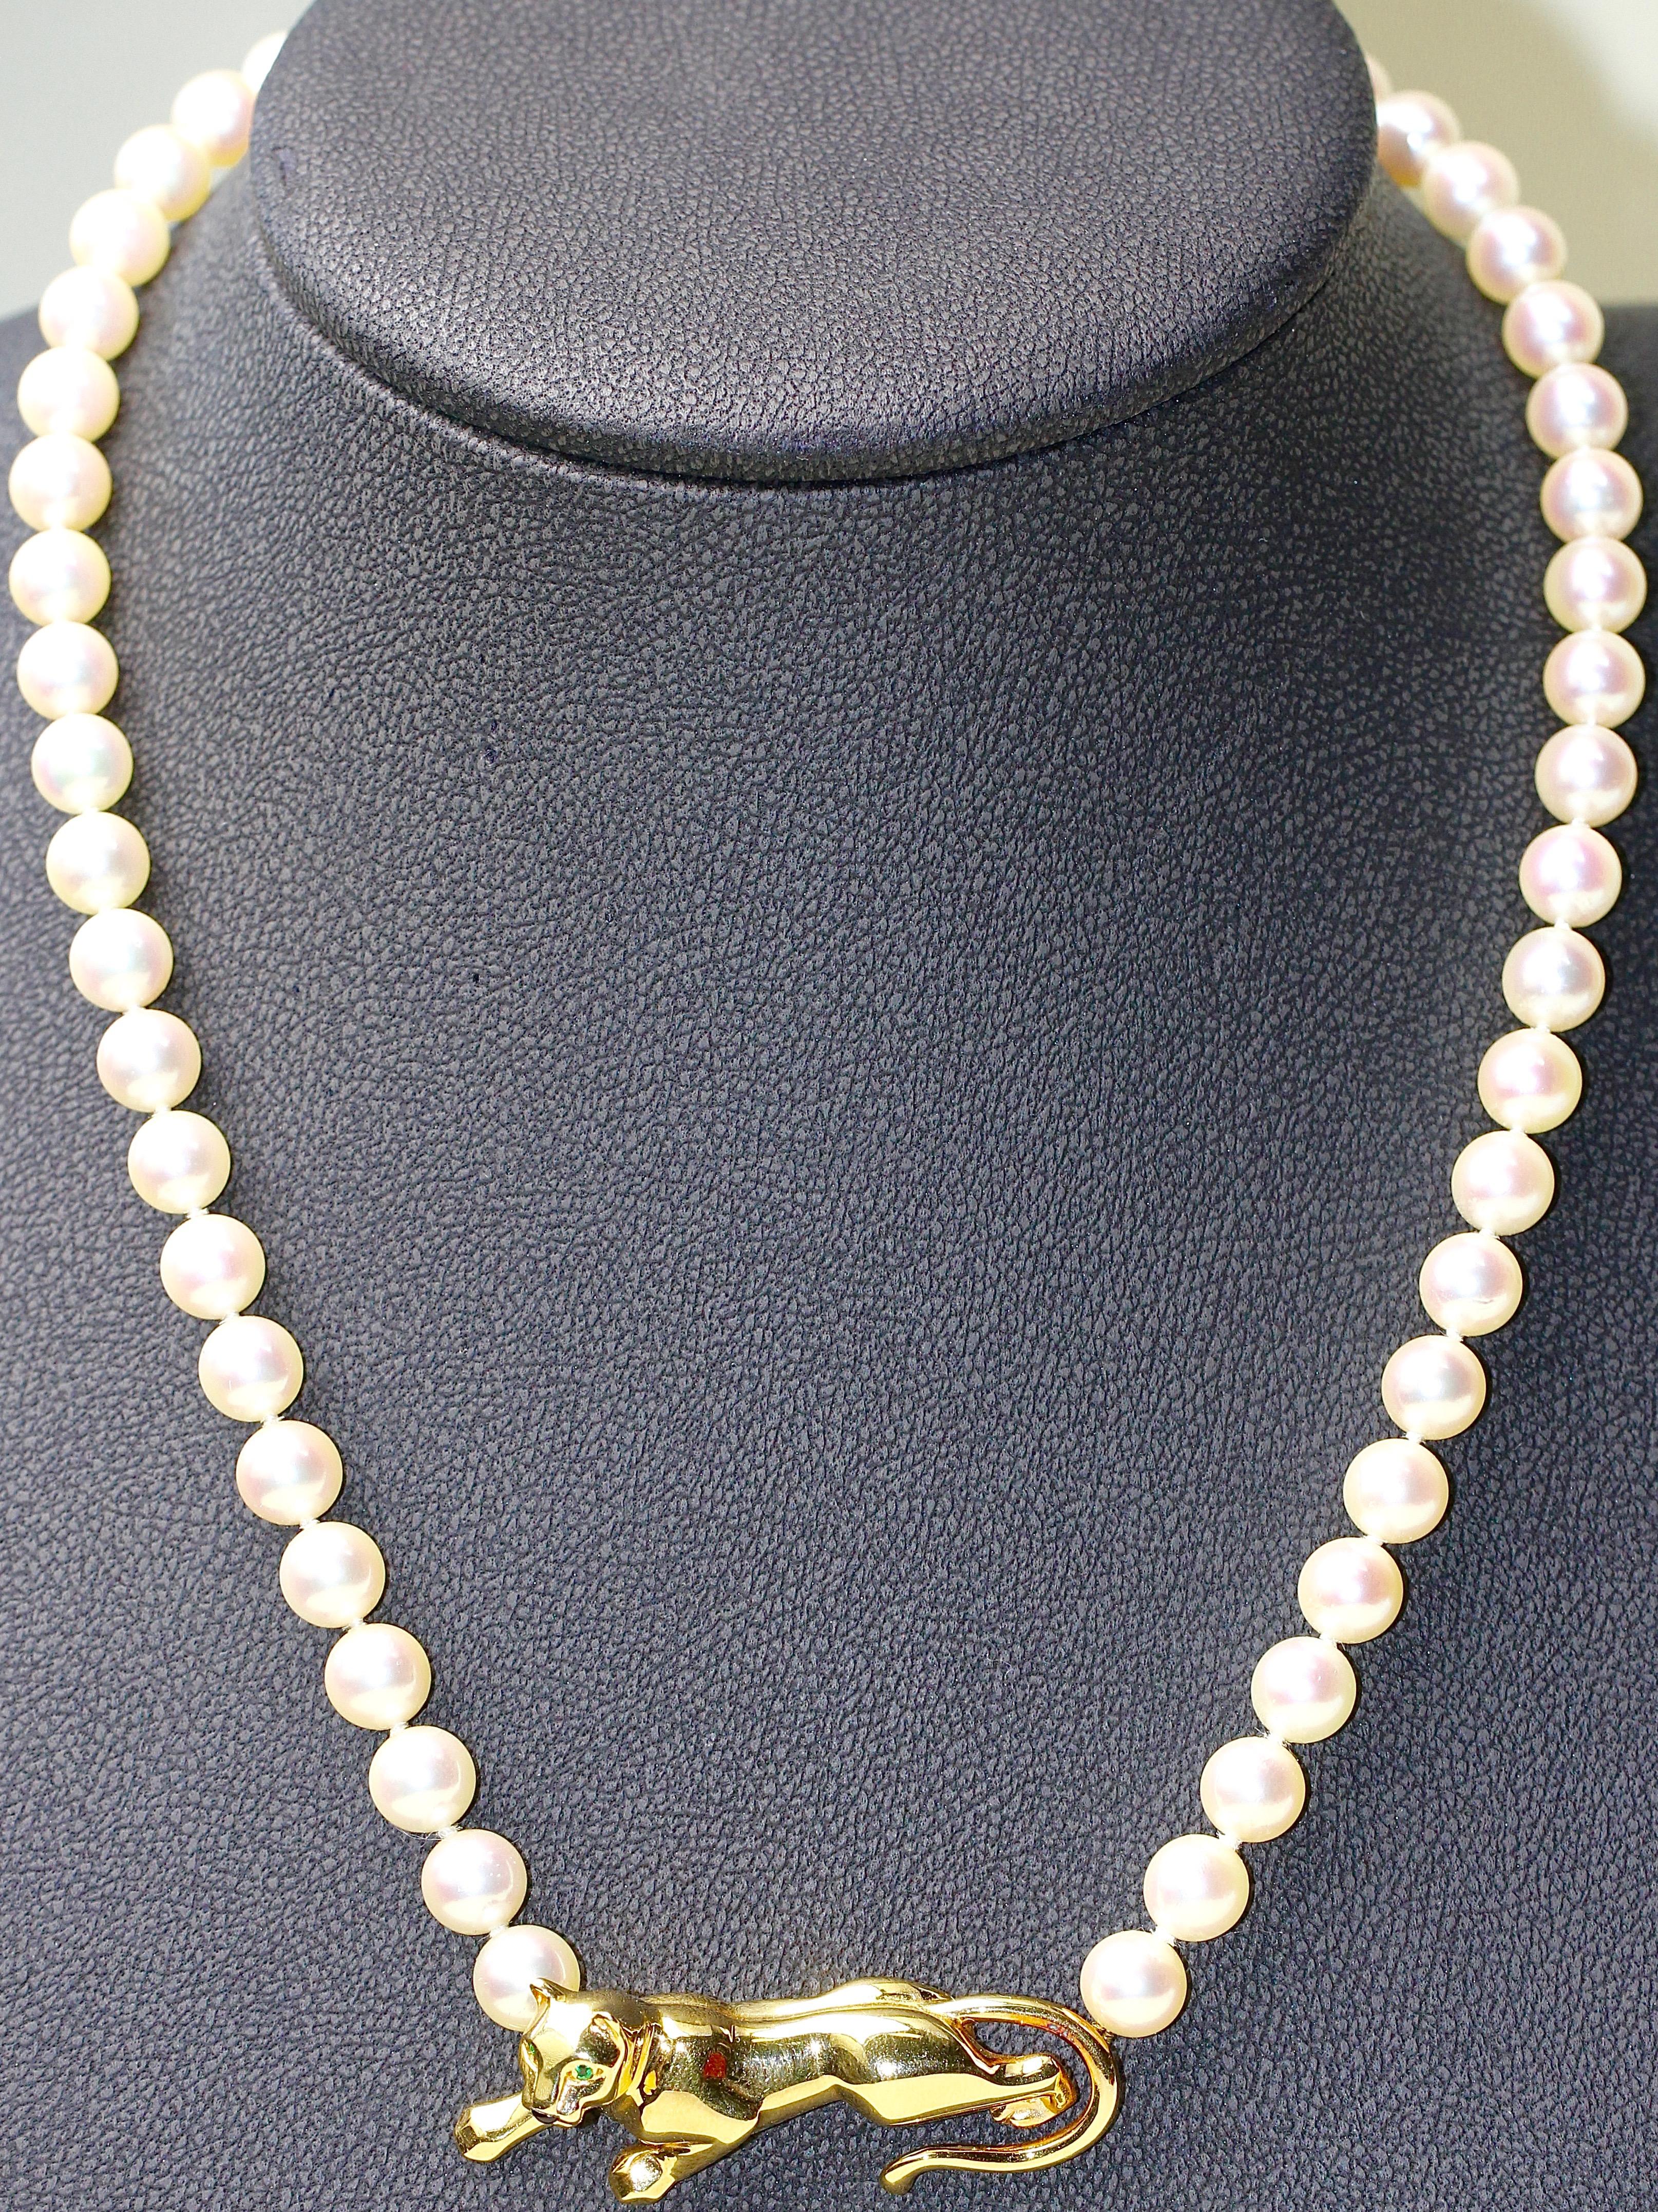 Elegant Cartier Panthere Beaded Necklace. Real natural pearls with a diameter of min. 7mm. 
18 karat gold clasp and panther. 
Panther eyes made of emeralds.
Includes four individual beads (shortened by Cartier Service).
100% original cartier,